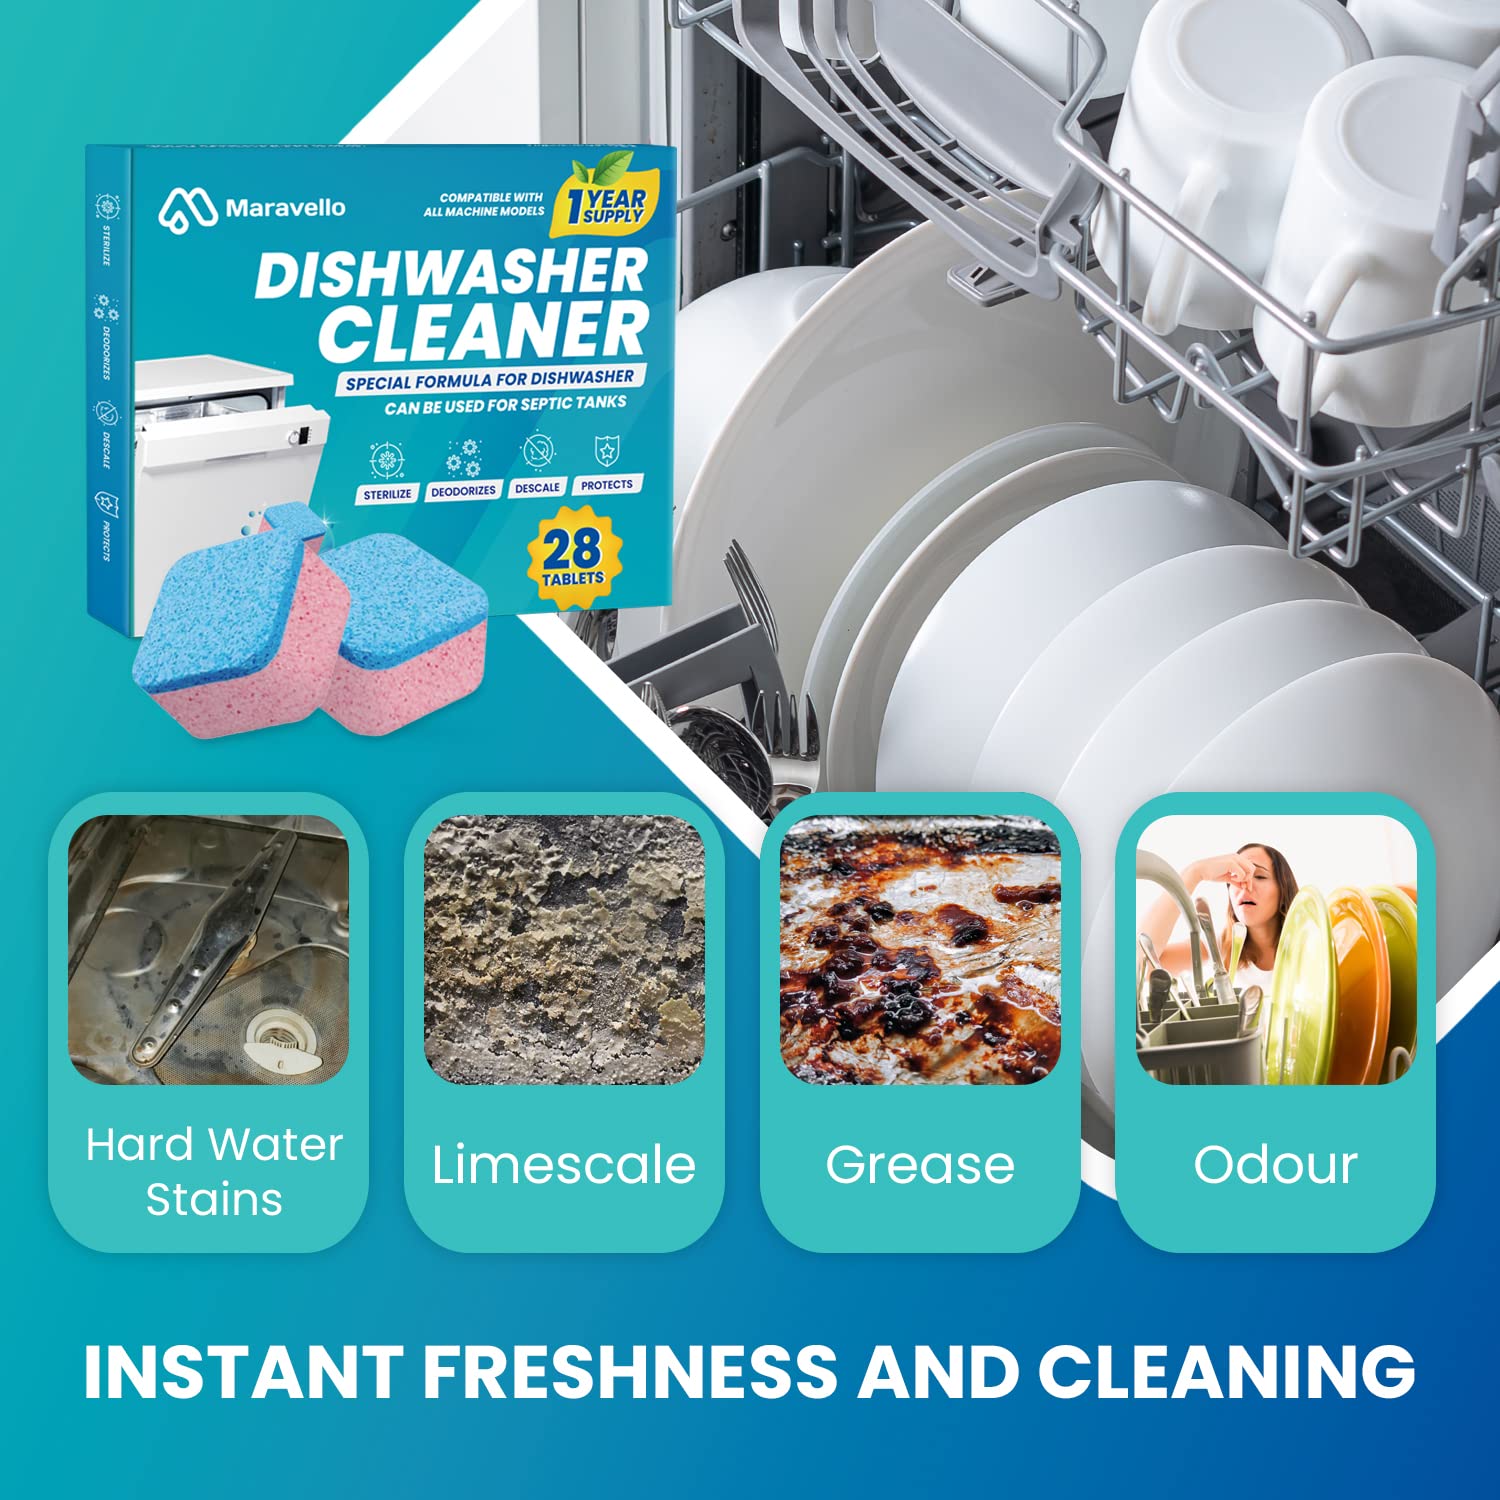 Maravello Dishwasher Cleaner And Deodorizer, Extra Clean Dishwasher Tablets, Remove Limescale, Grease and Odor, Septic Tank Safe- 28 Tablets, 12 Months Supply